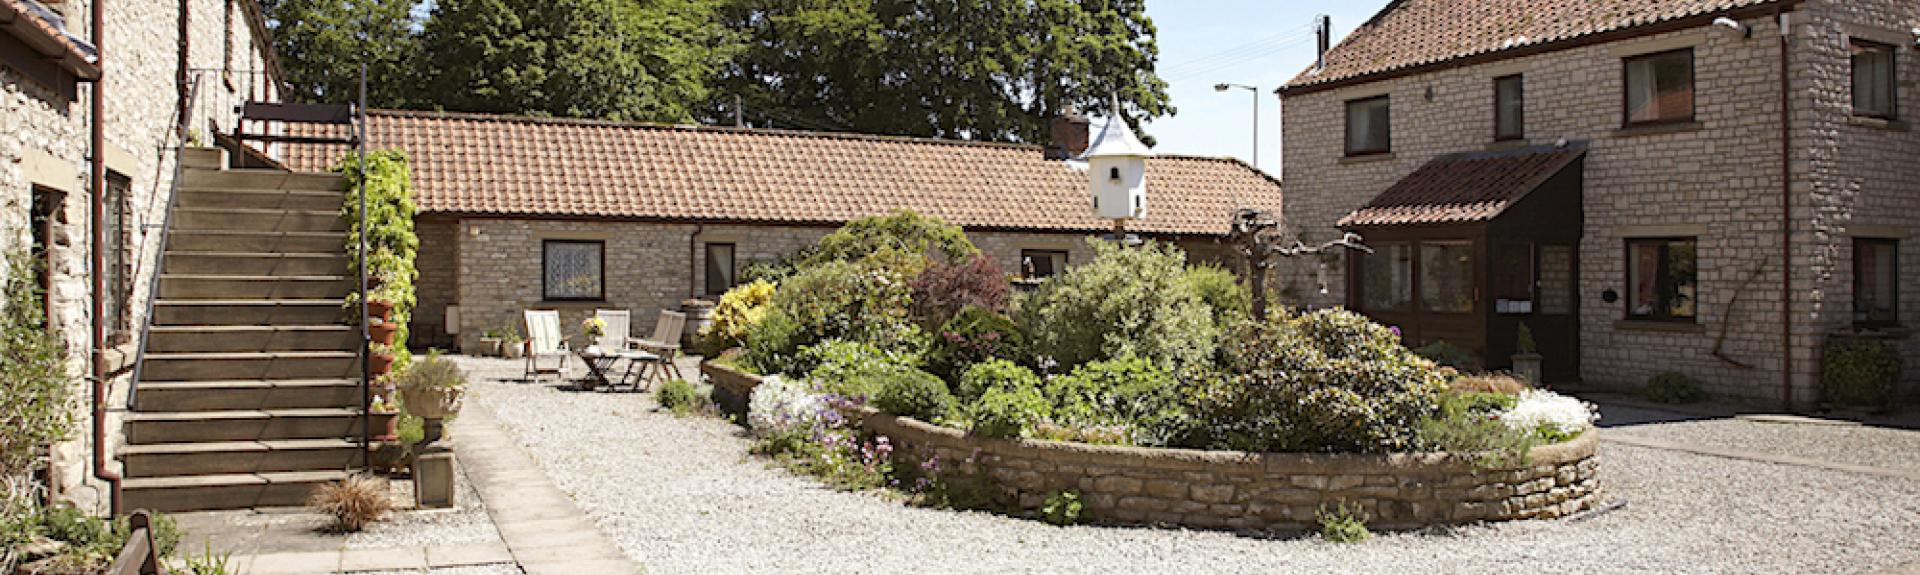 Barn conversions in a courtyard overlook a raised flower bed in its centre